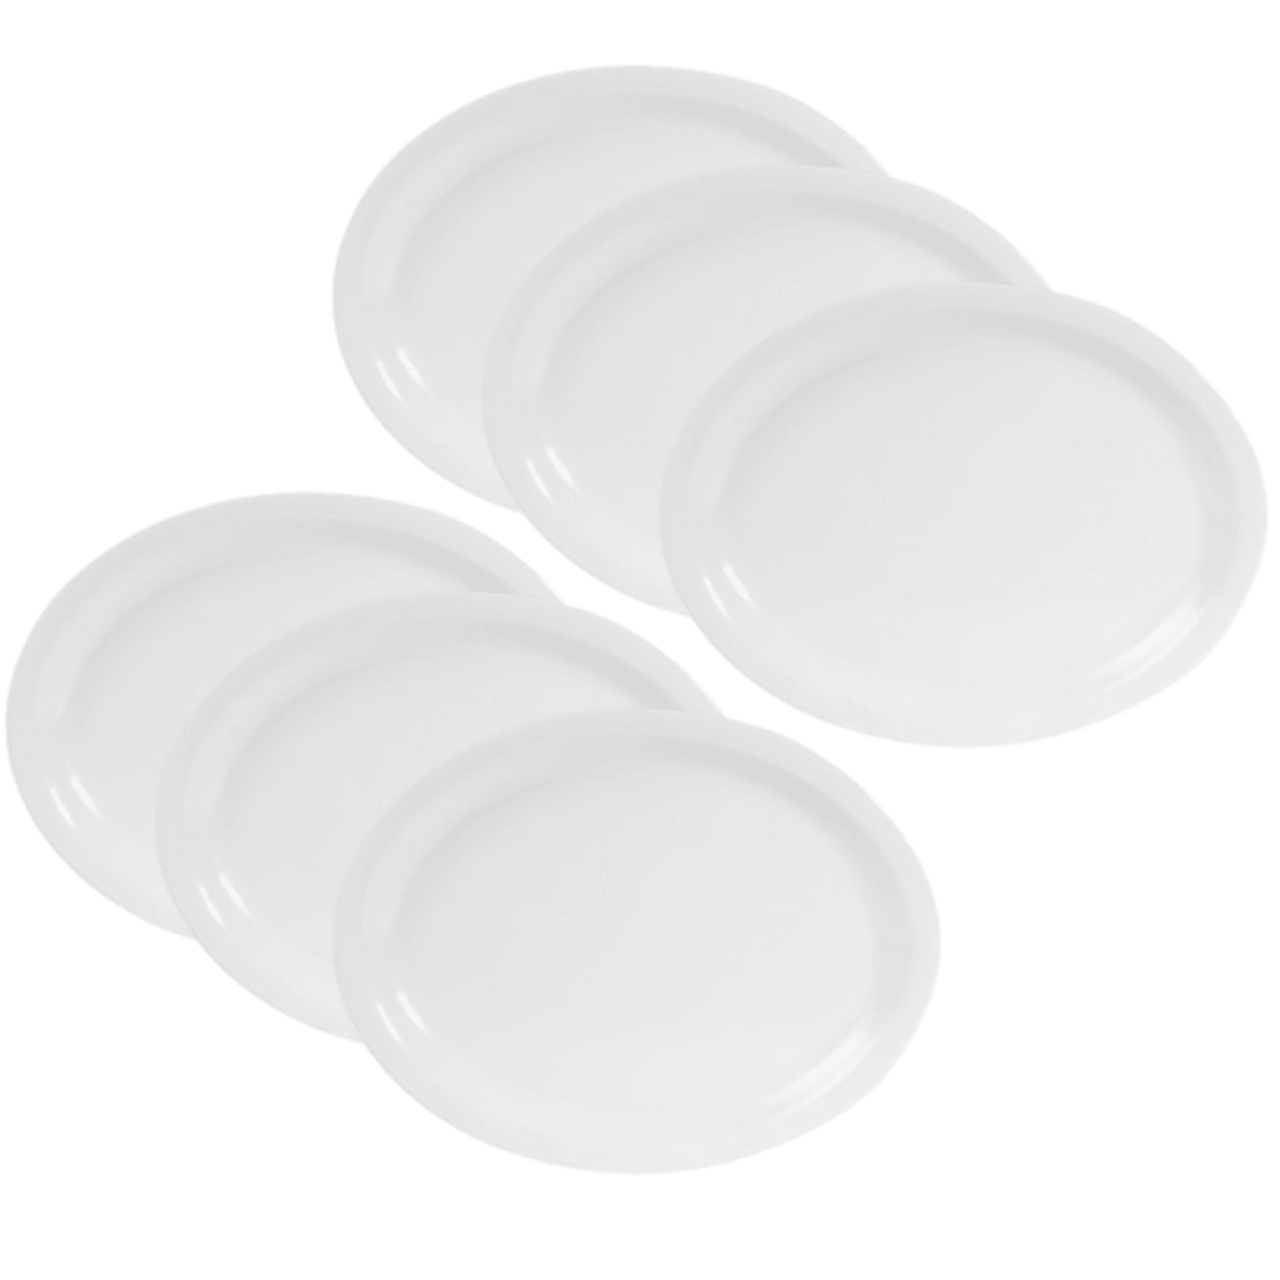 Elite Global Solutions Simplicity 9 5/8" x 7 1/2" White Oval Melamine Plate - 6/Case. CHICKEN PIECES.